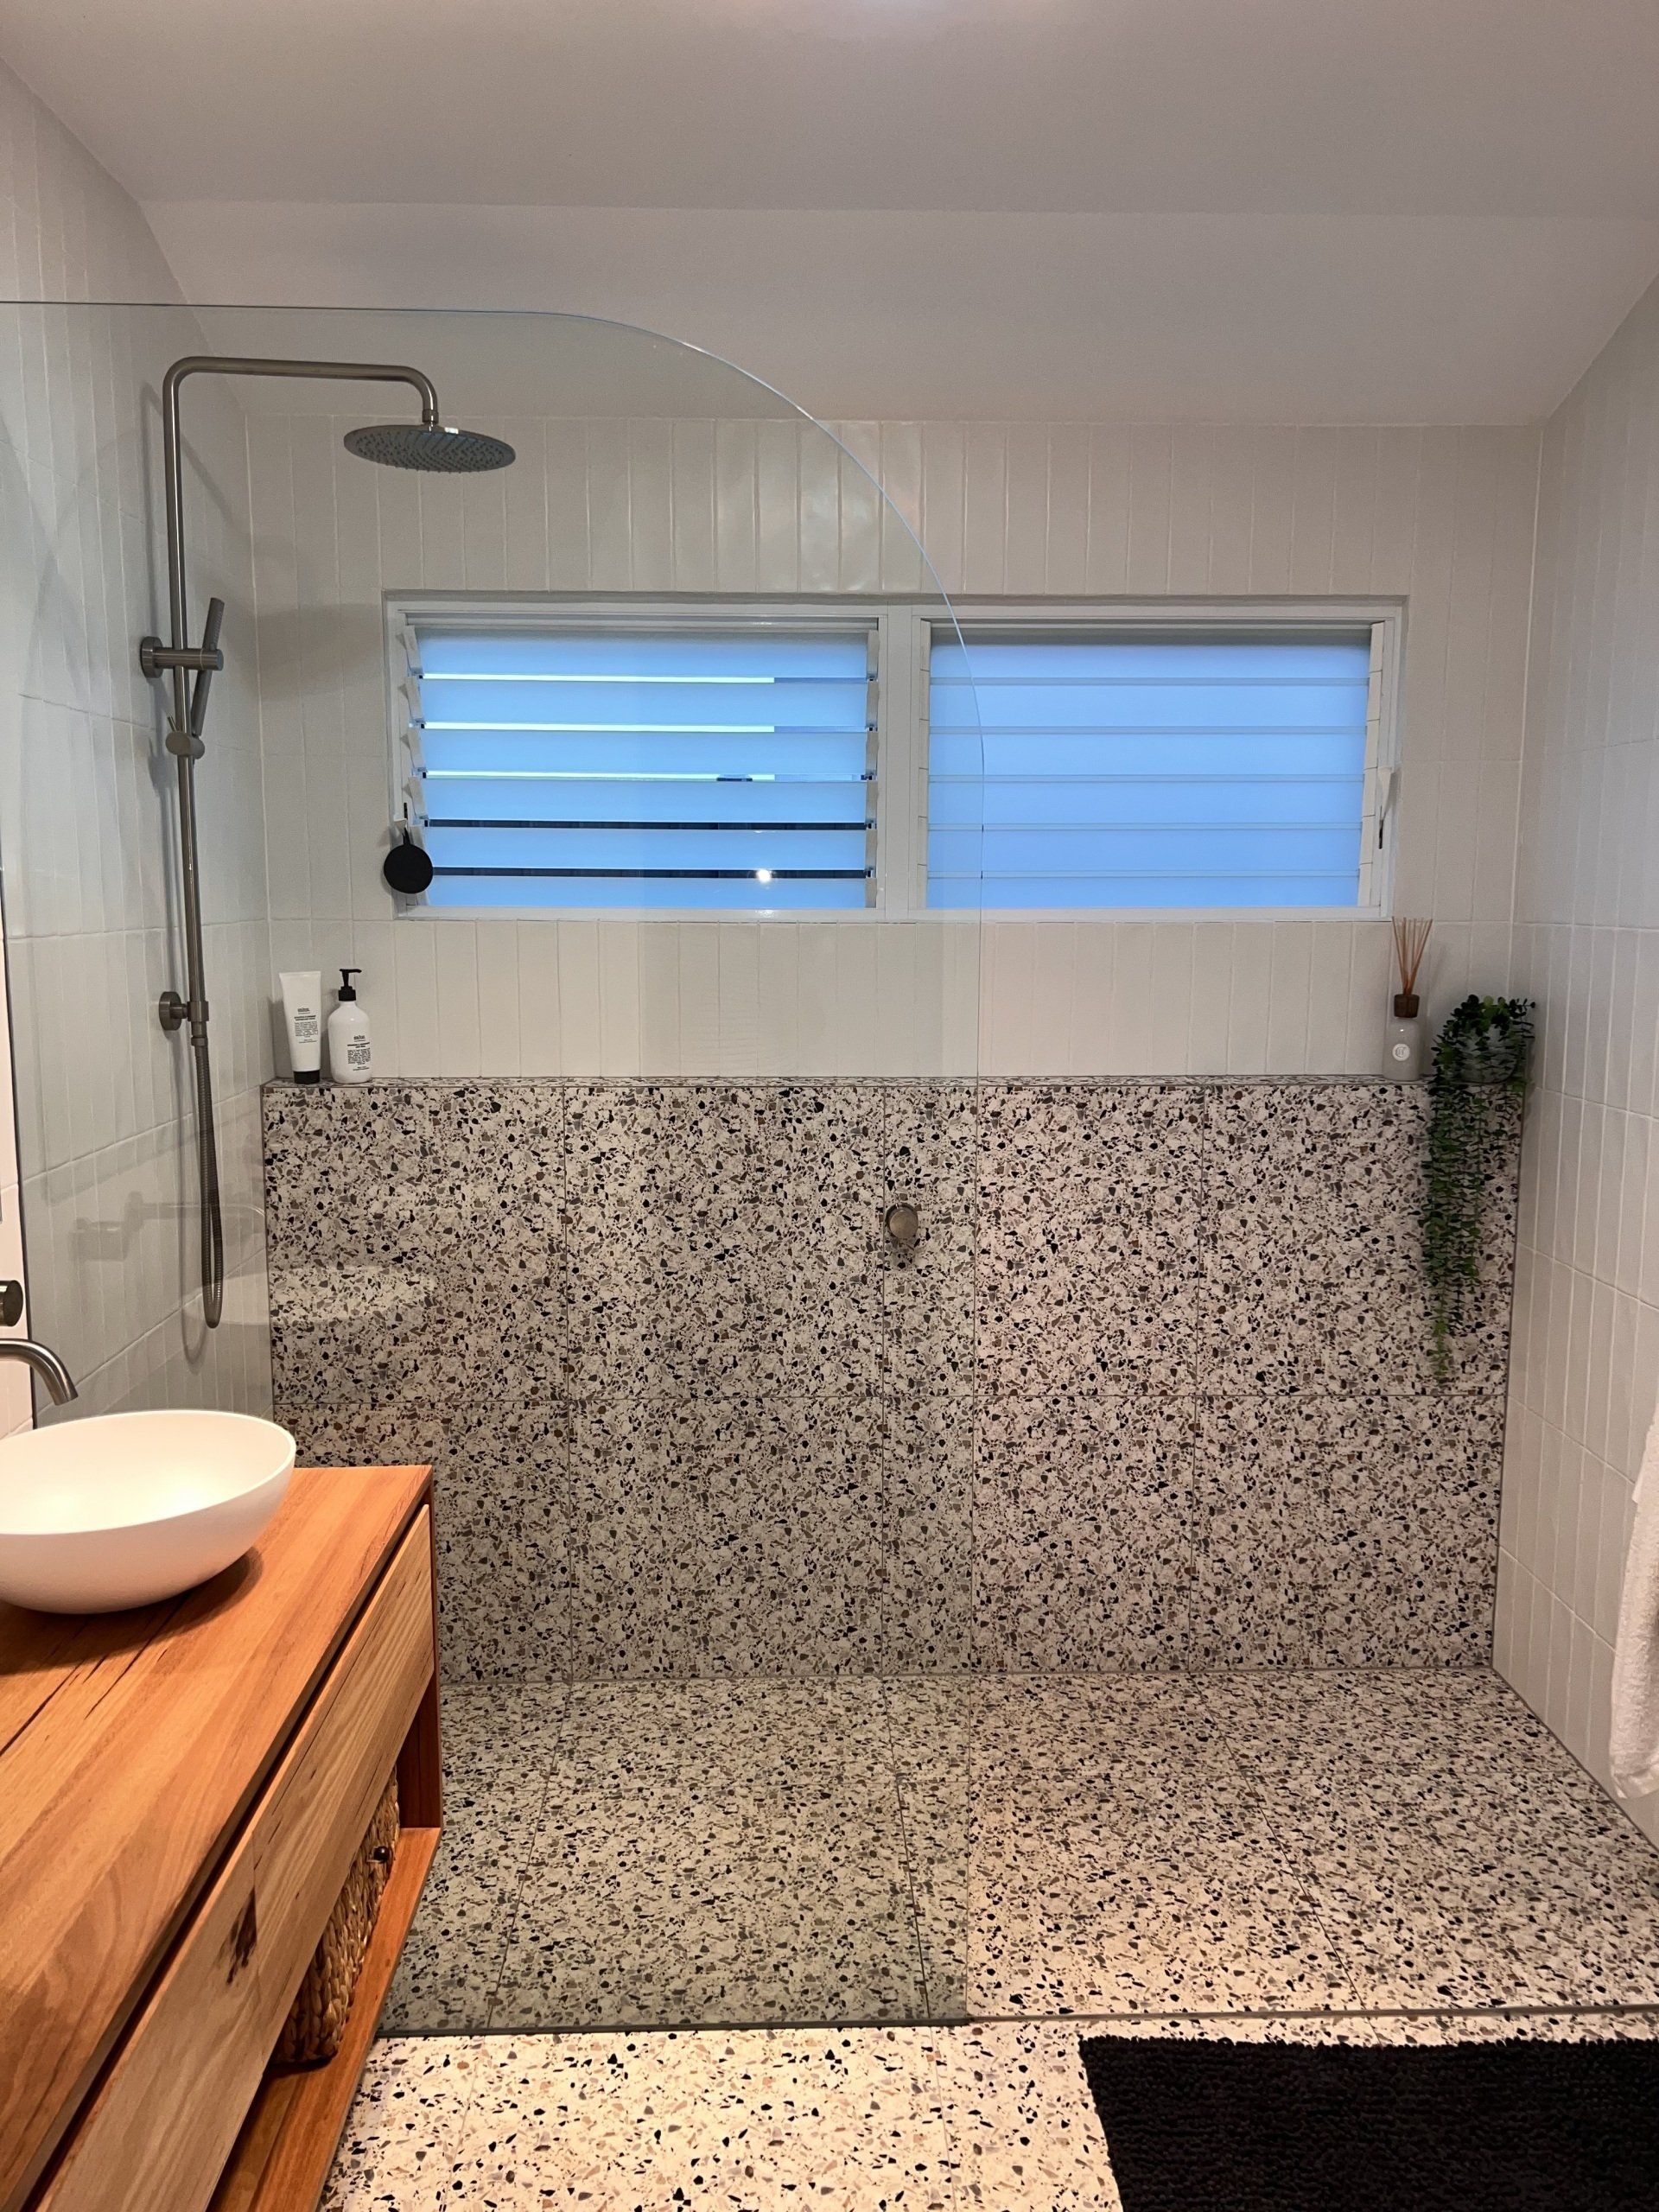 New Ensuite Bathroom Shower Screen — Window Glass Repair and Installation in Coffs Harbour, NSW